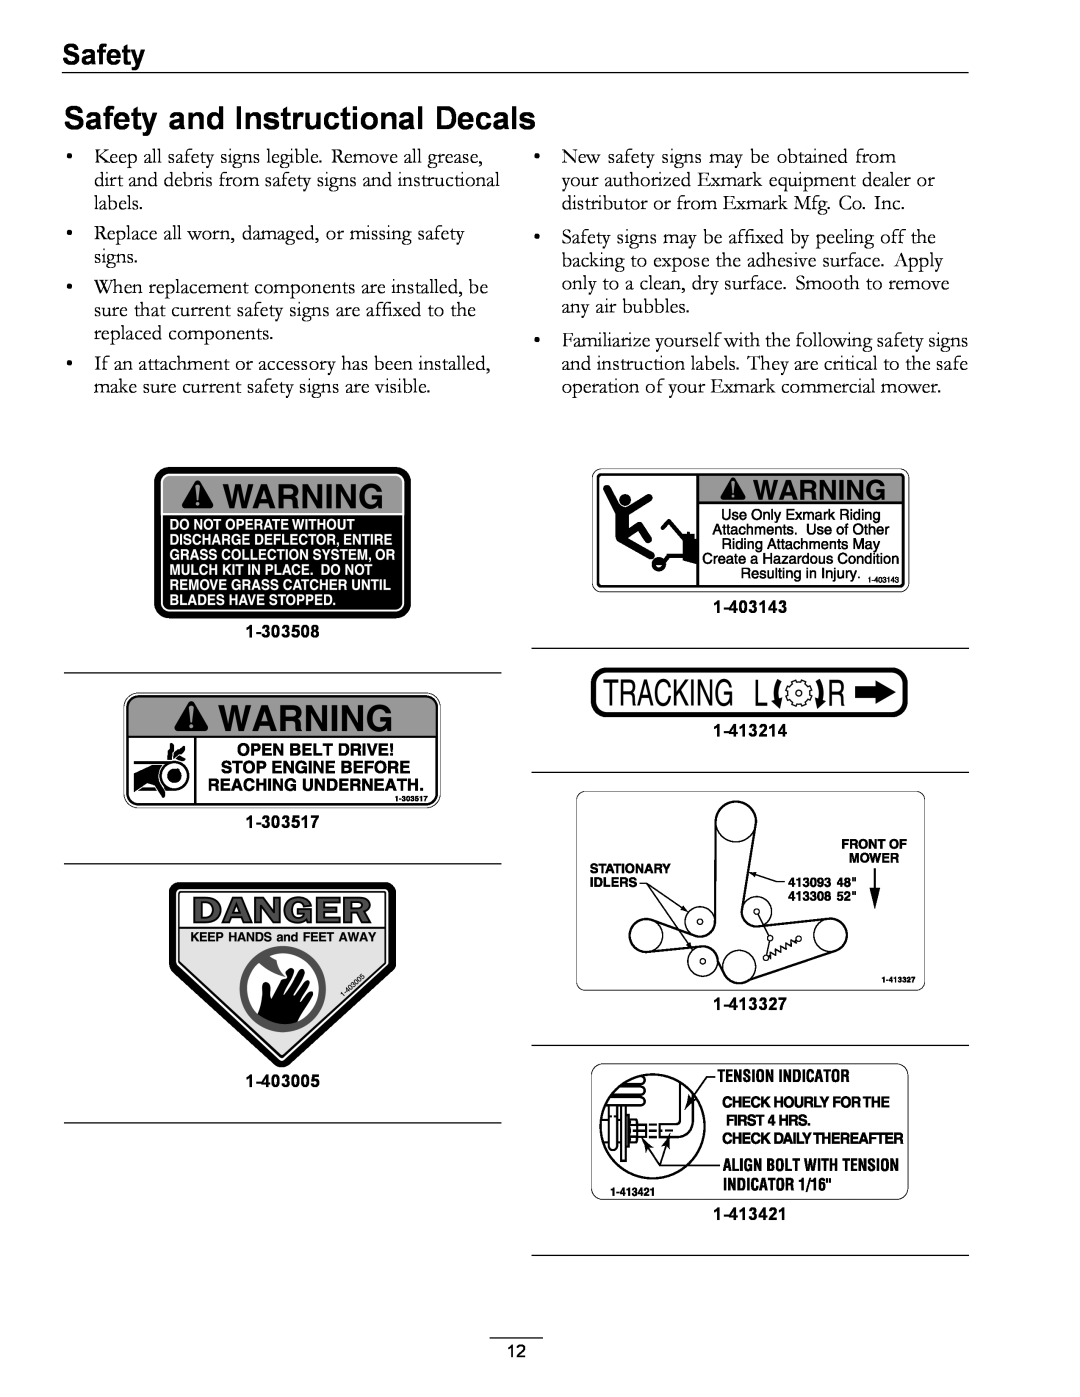 Exmark 000 & higher, 312 manual Safety and Instructional Decals 